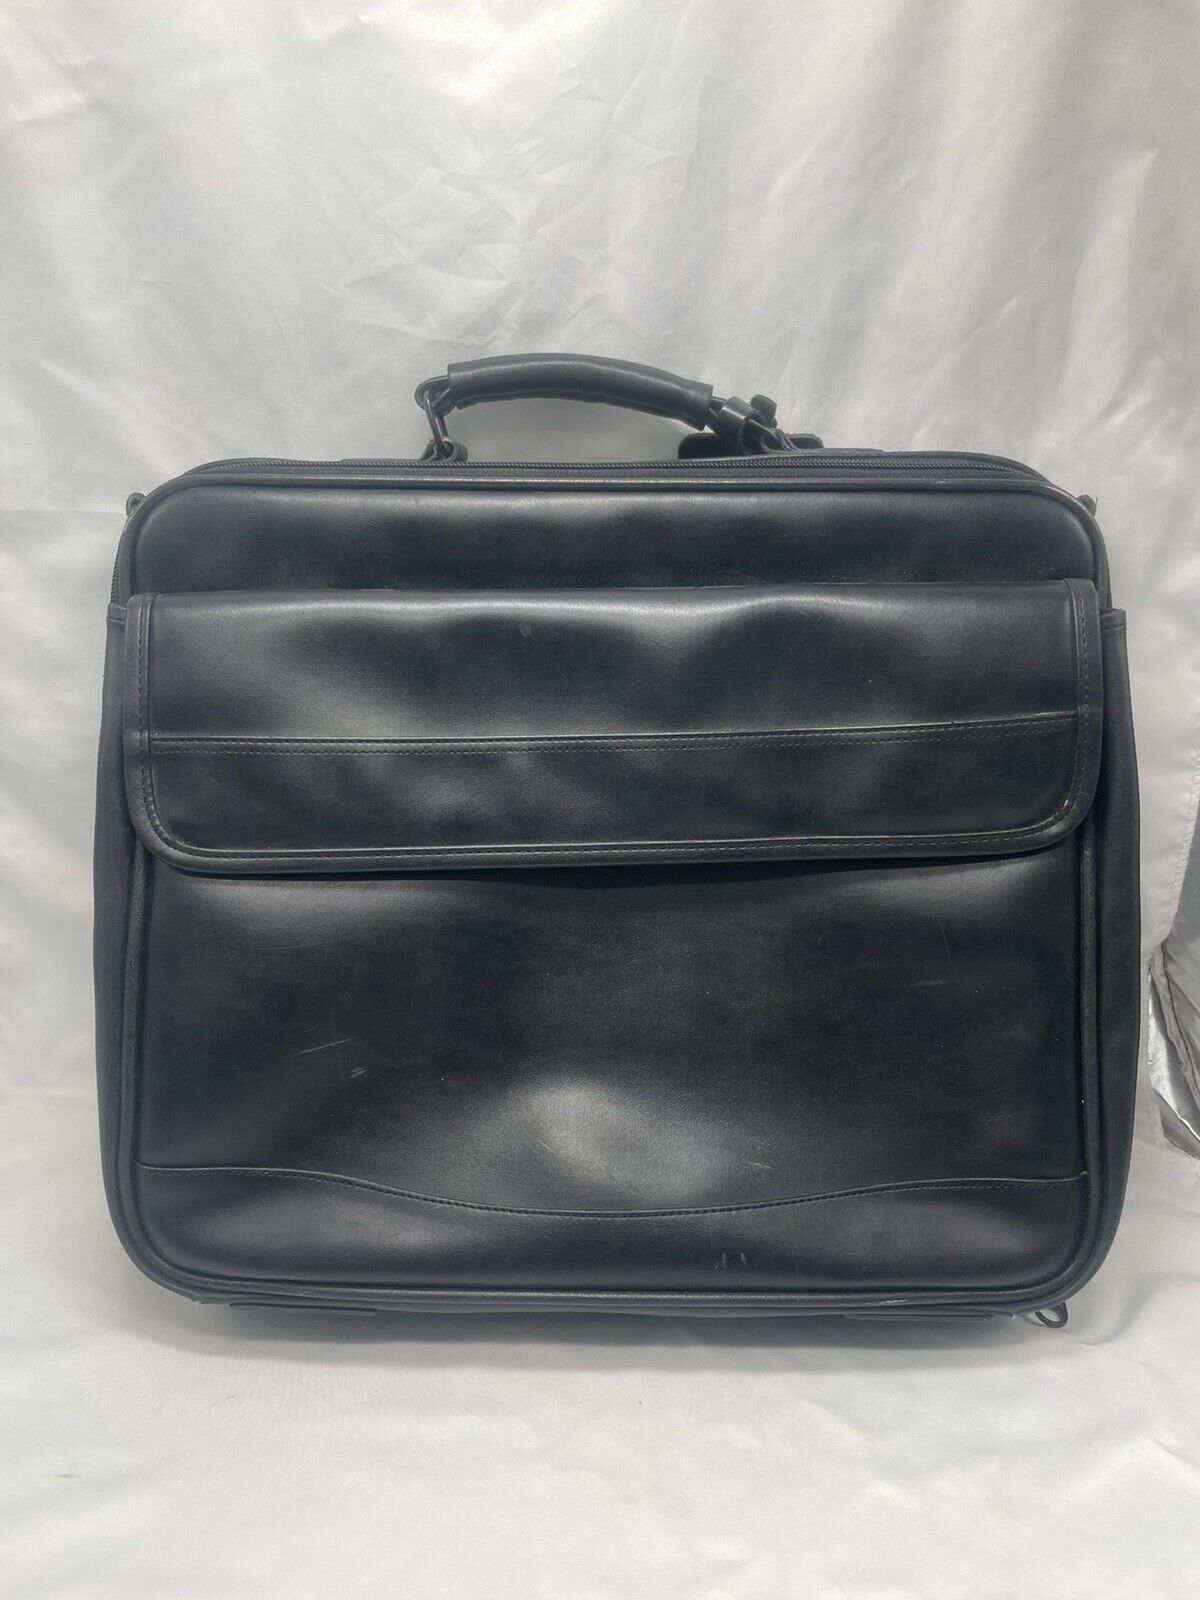 Vintage IBM Thinkpad SafePORT Protection Systems Laptop Computer Bag Briefcase